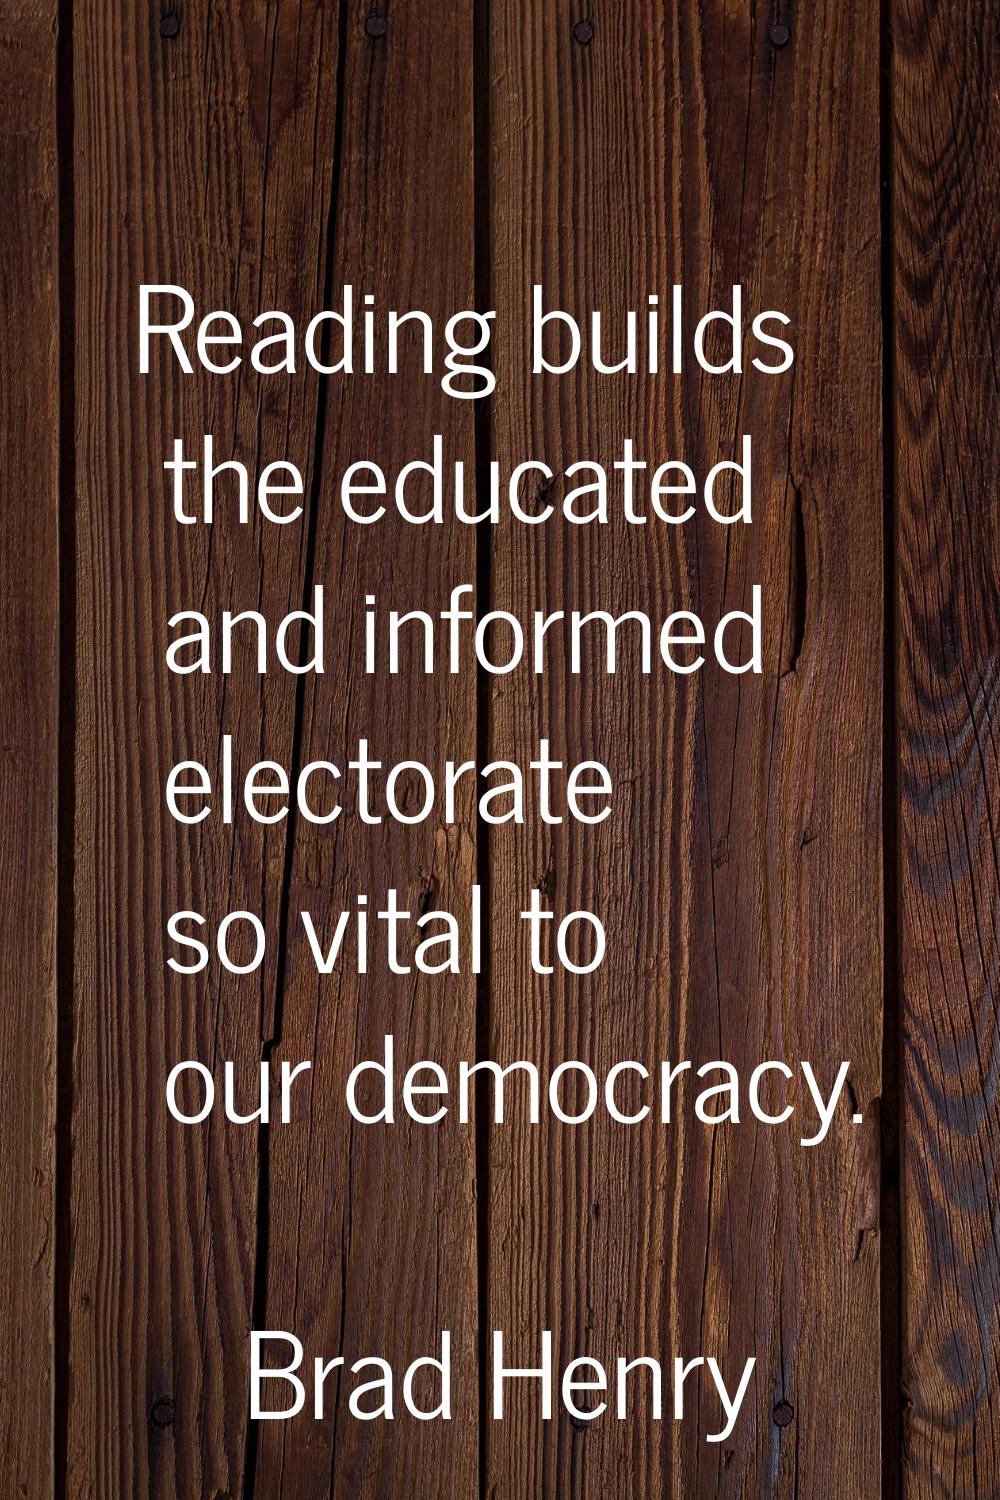 Reading builds the educated and informed electorate so vital to our democracy.